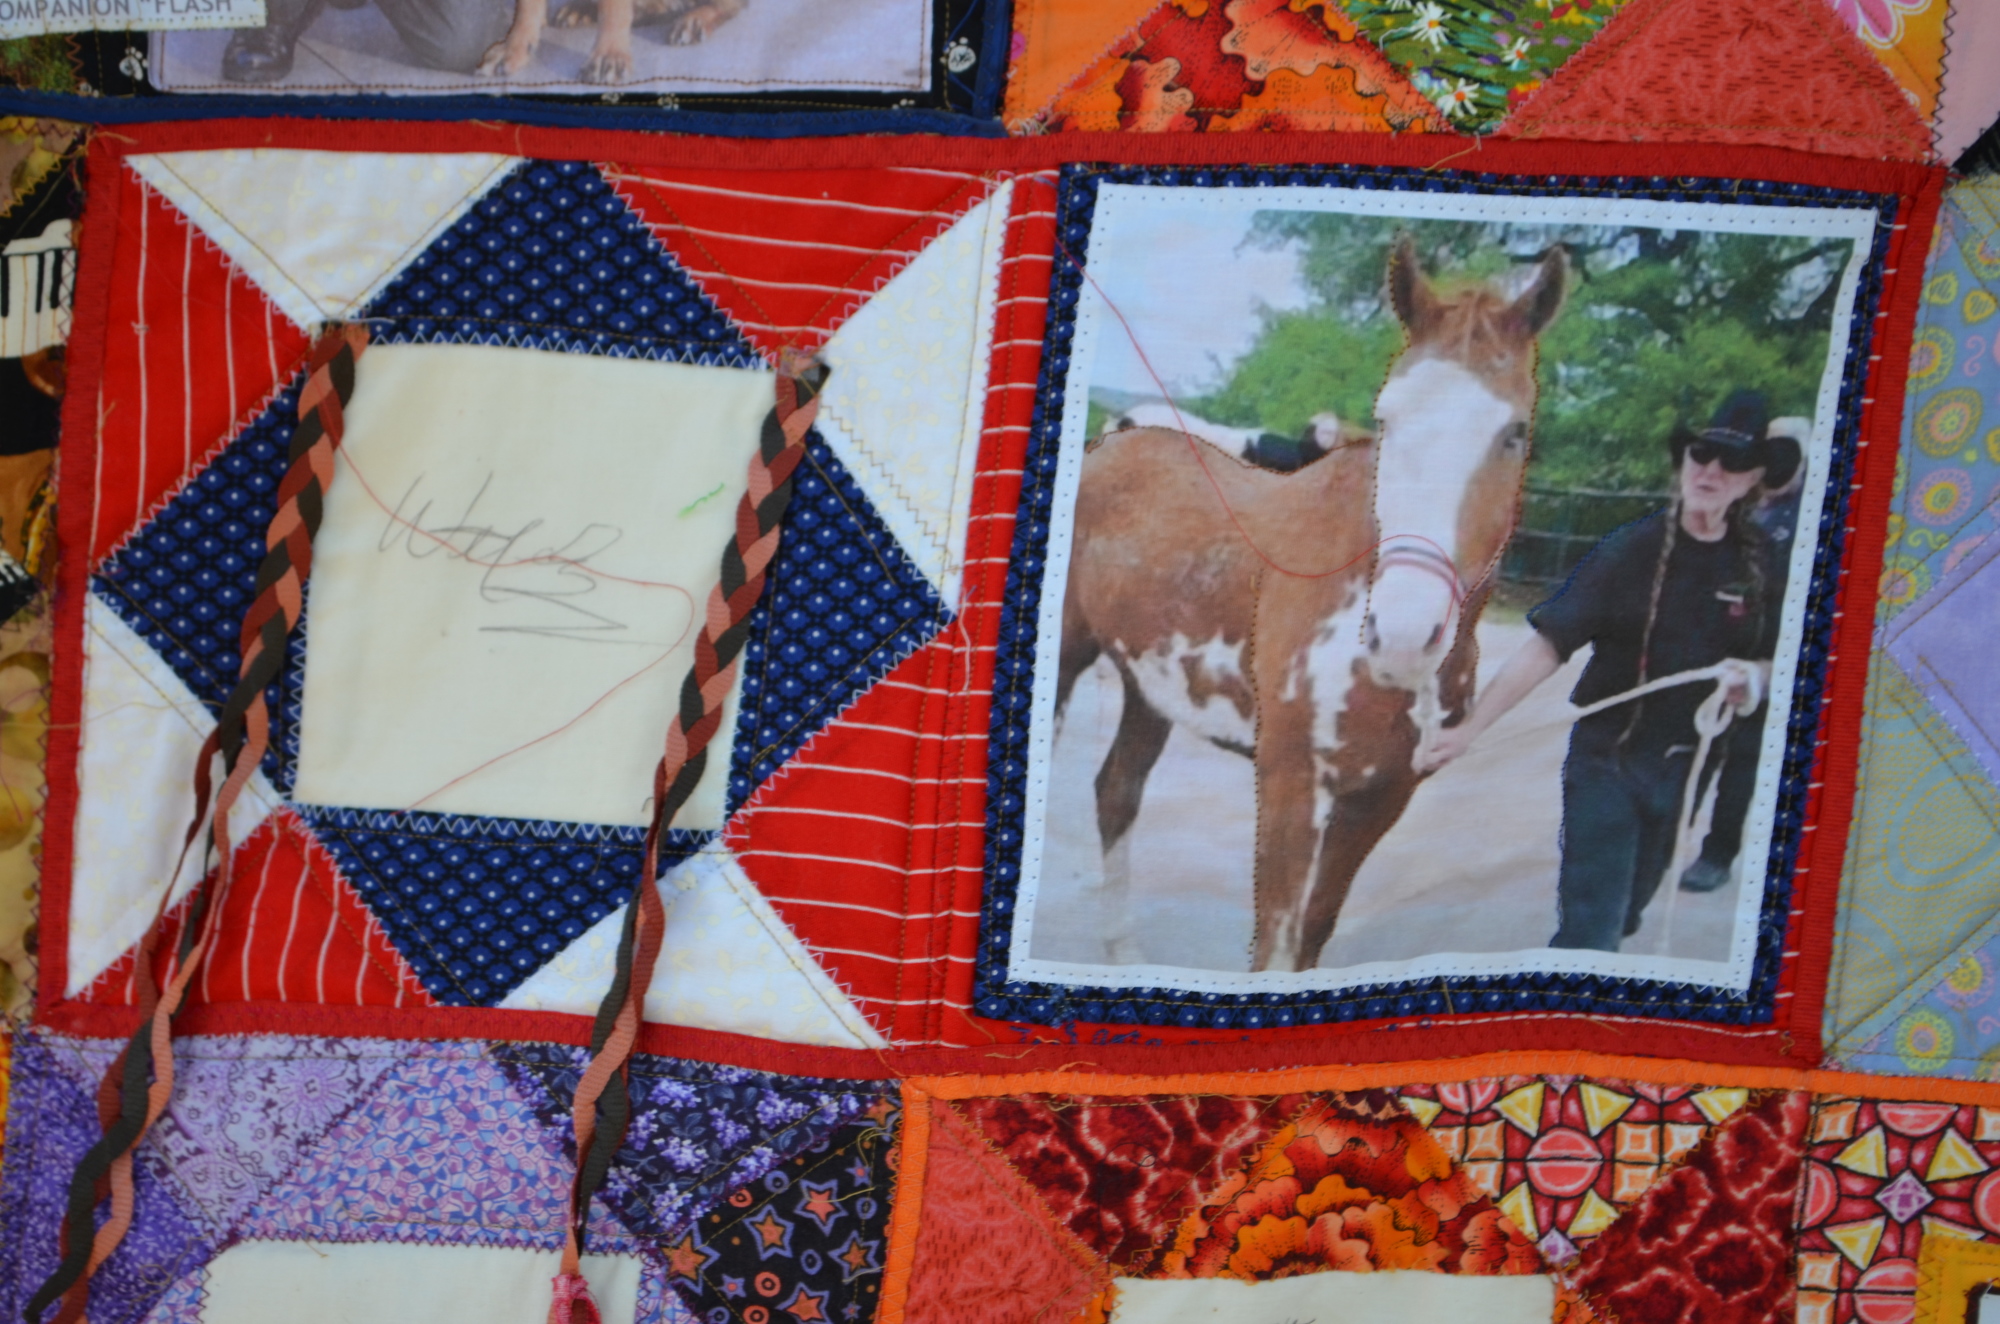 Country music artist Willie Nelson signed Joan DaVanzo's quilt. Nelson has a partnership with Habitat for Horses to rescue horses and stop horse slaughter.